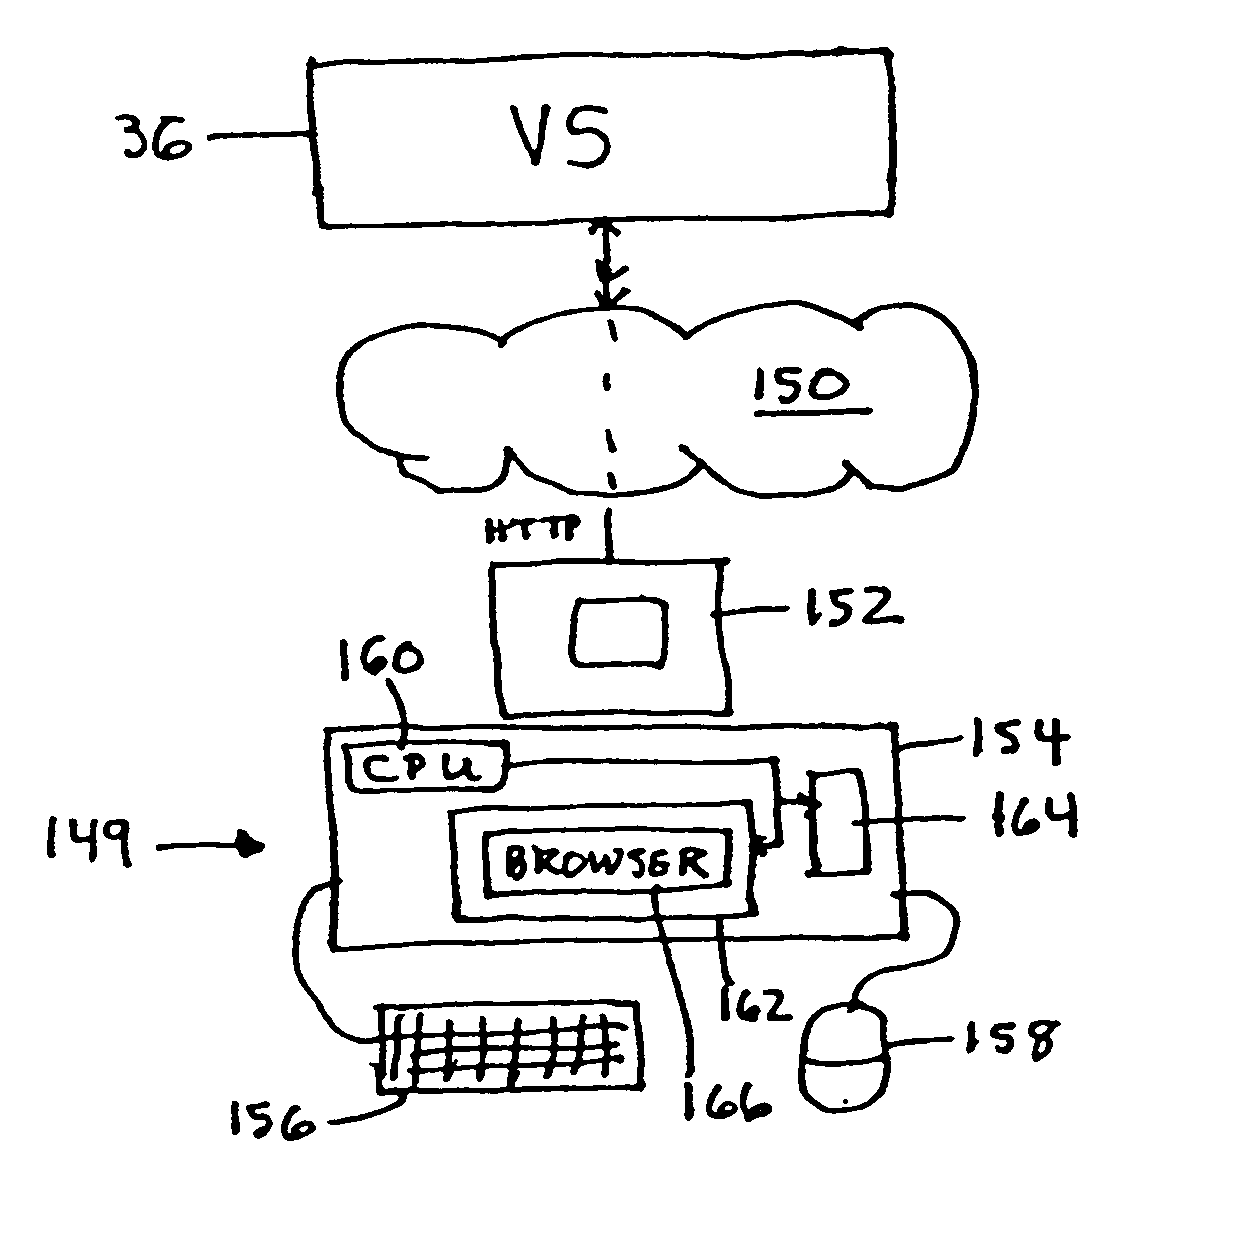 Voice-controlled wireless communications system and method